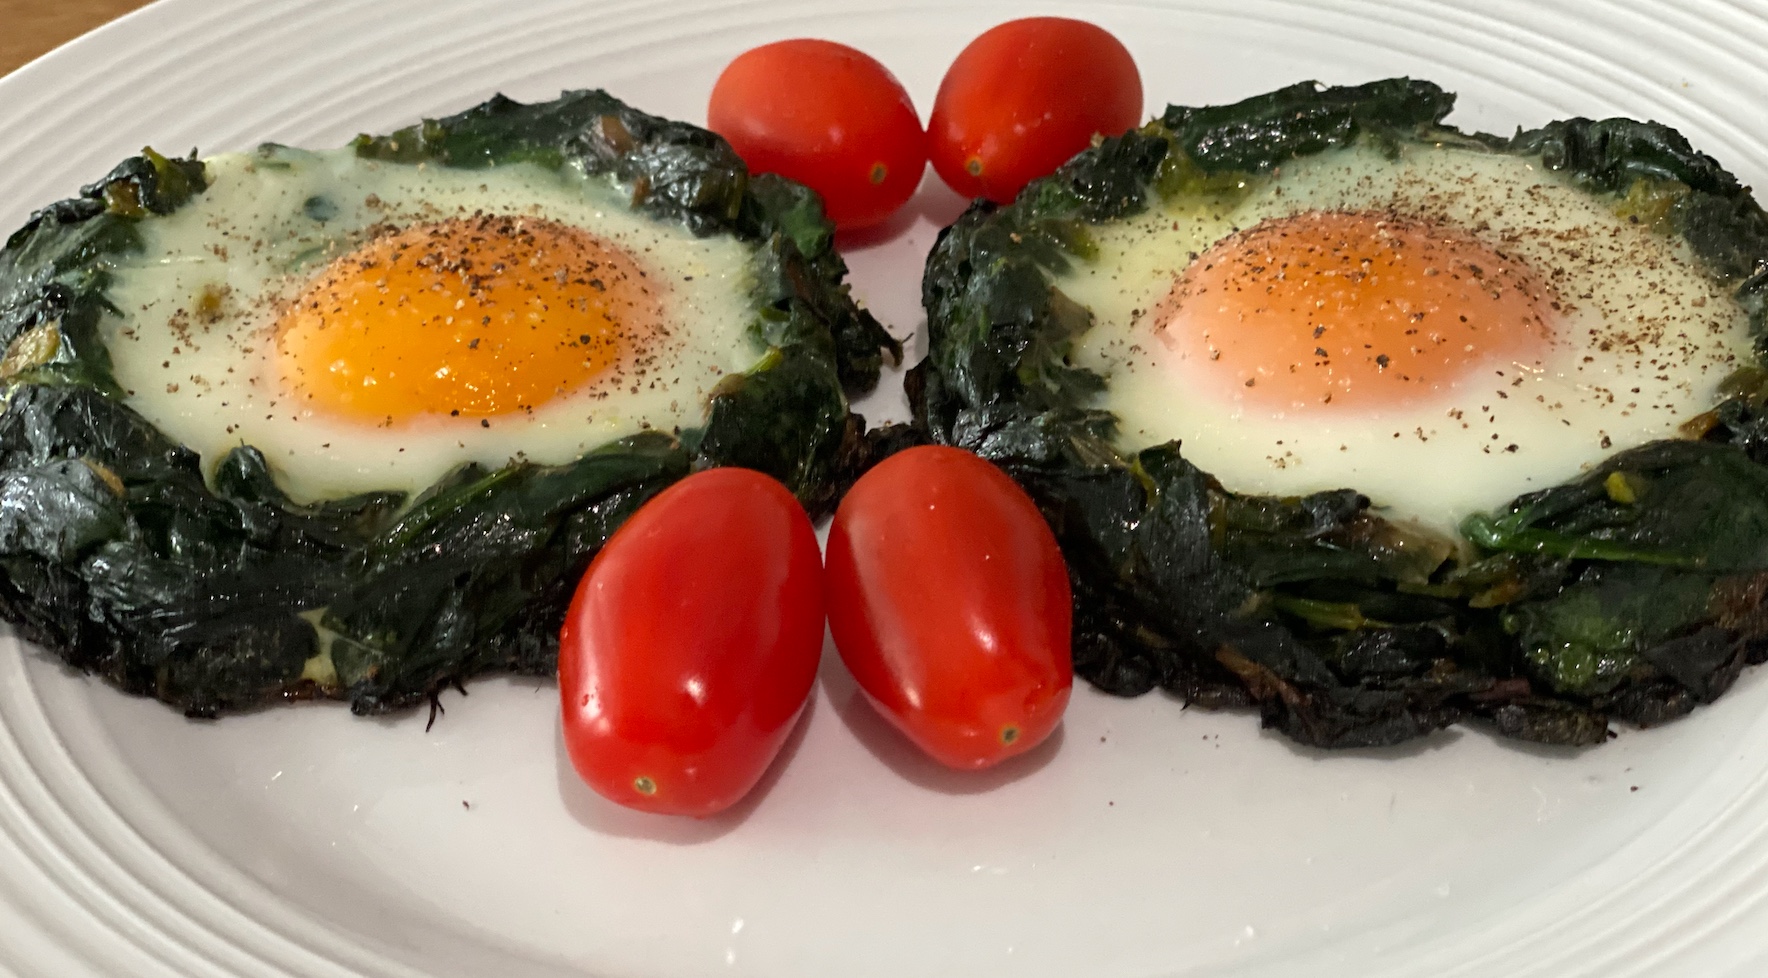 Spinach Egg Nests (Constantinople)